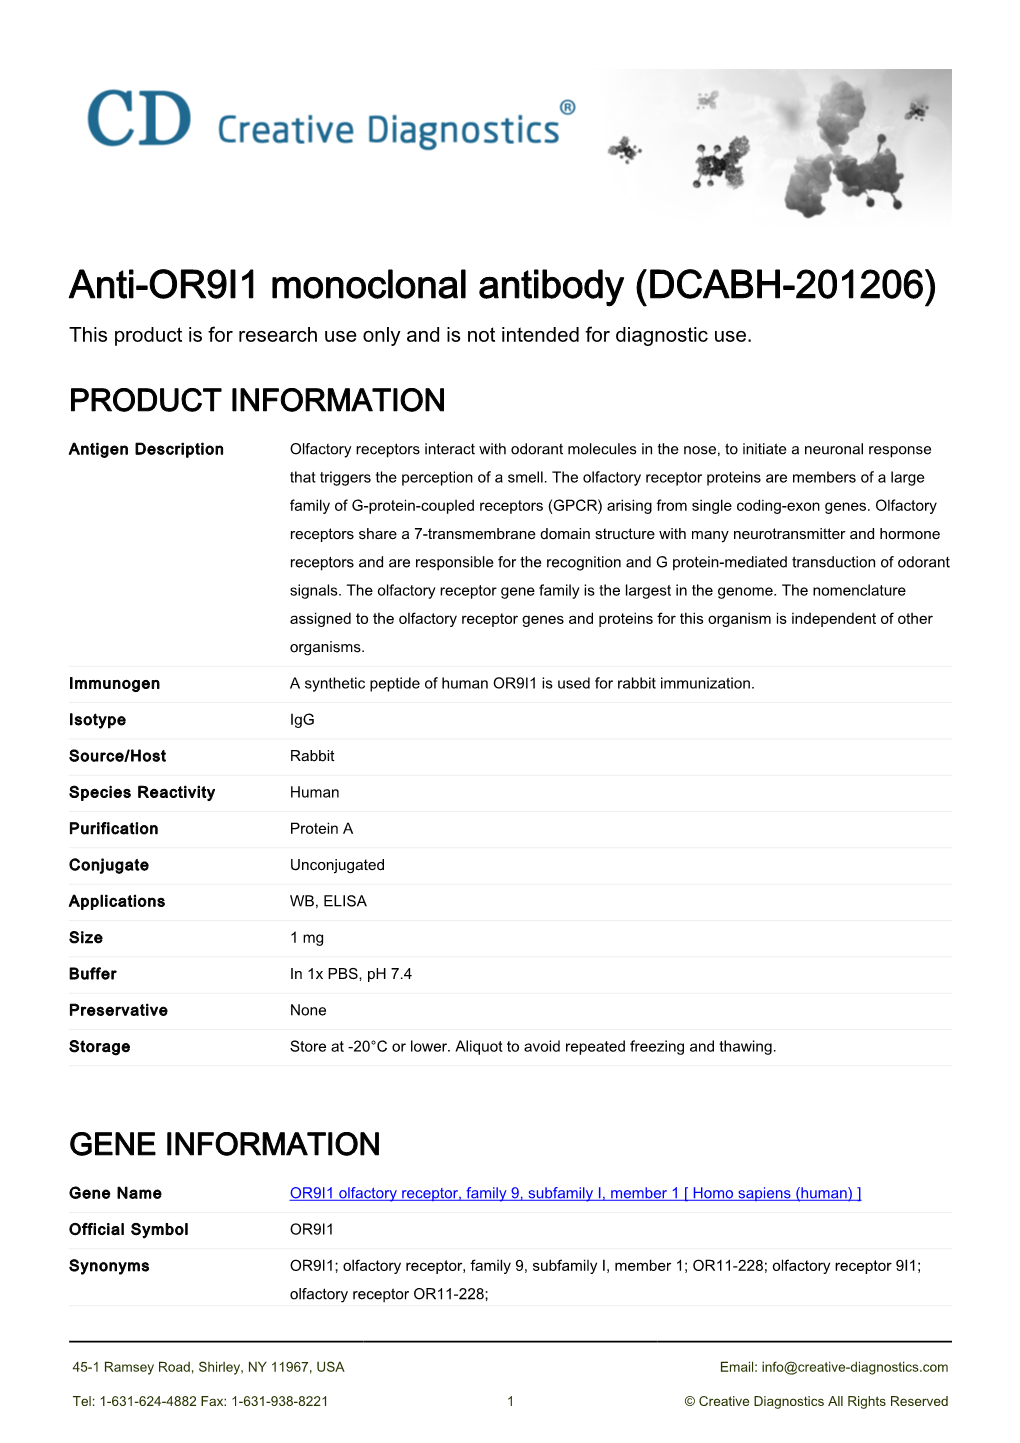 Anti-OR9I1 Monoclonal Antibody (DCABH-201206) This Product Is for Research Use Only and Is Not Intended for Diagnostic Use